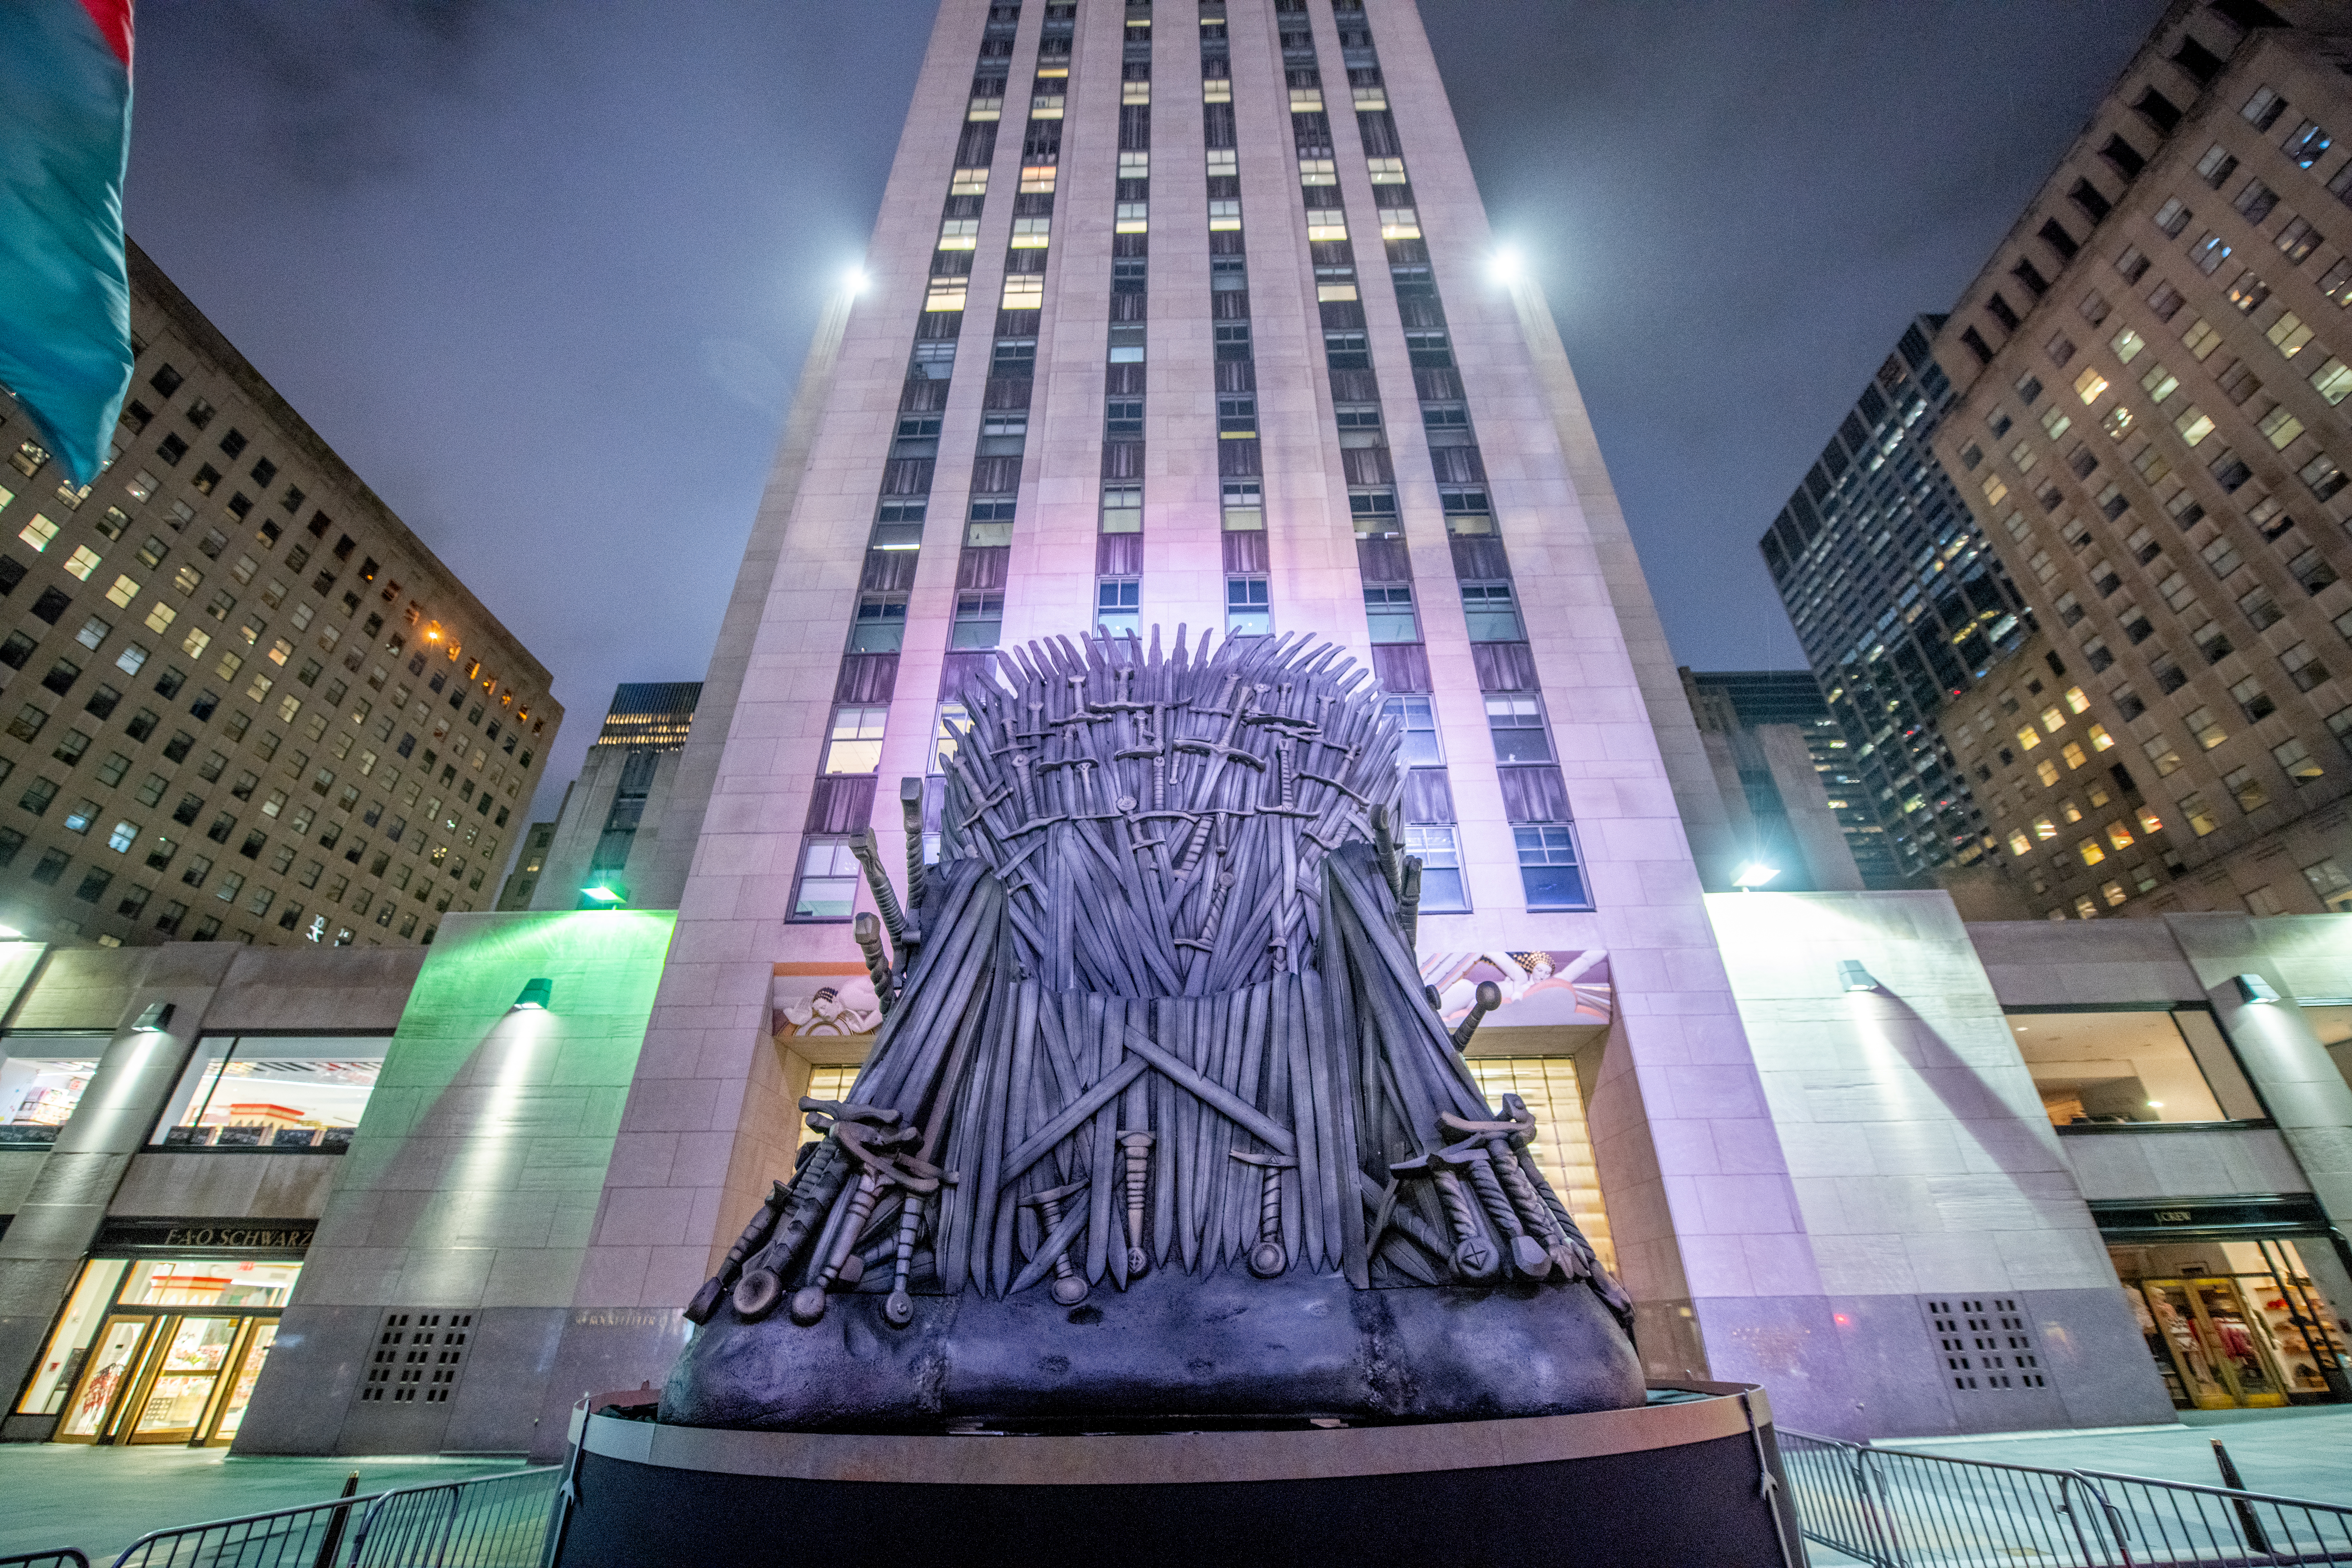 "Game Of Thrones" Iron Throne Appears In Rockefeller Center Ahead Of Premiere